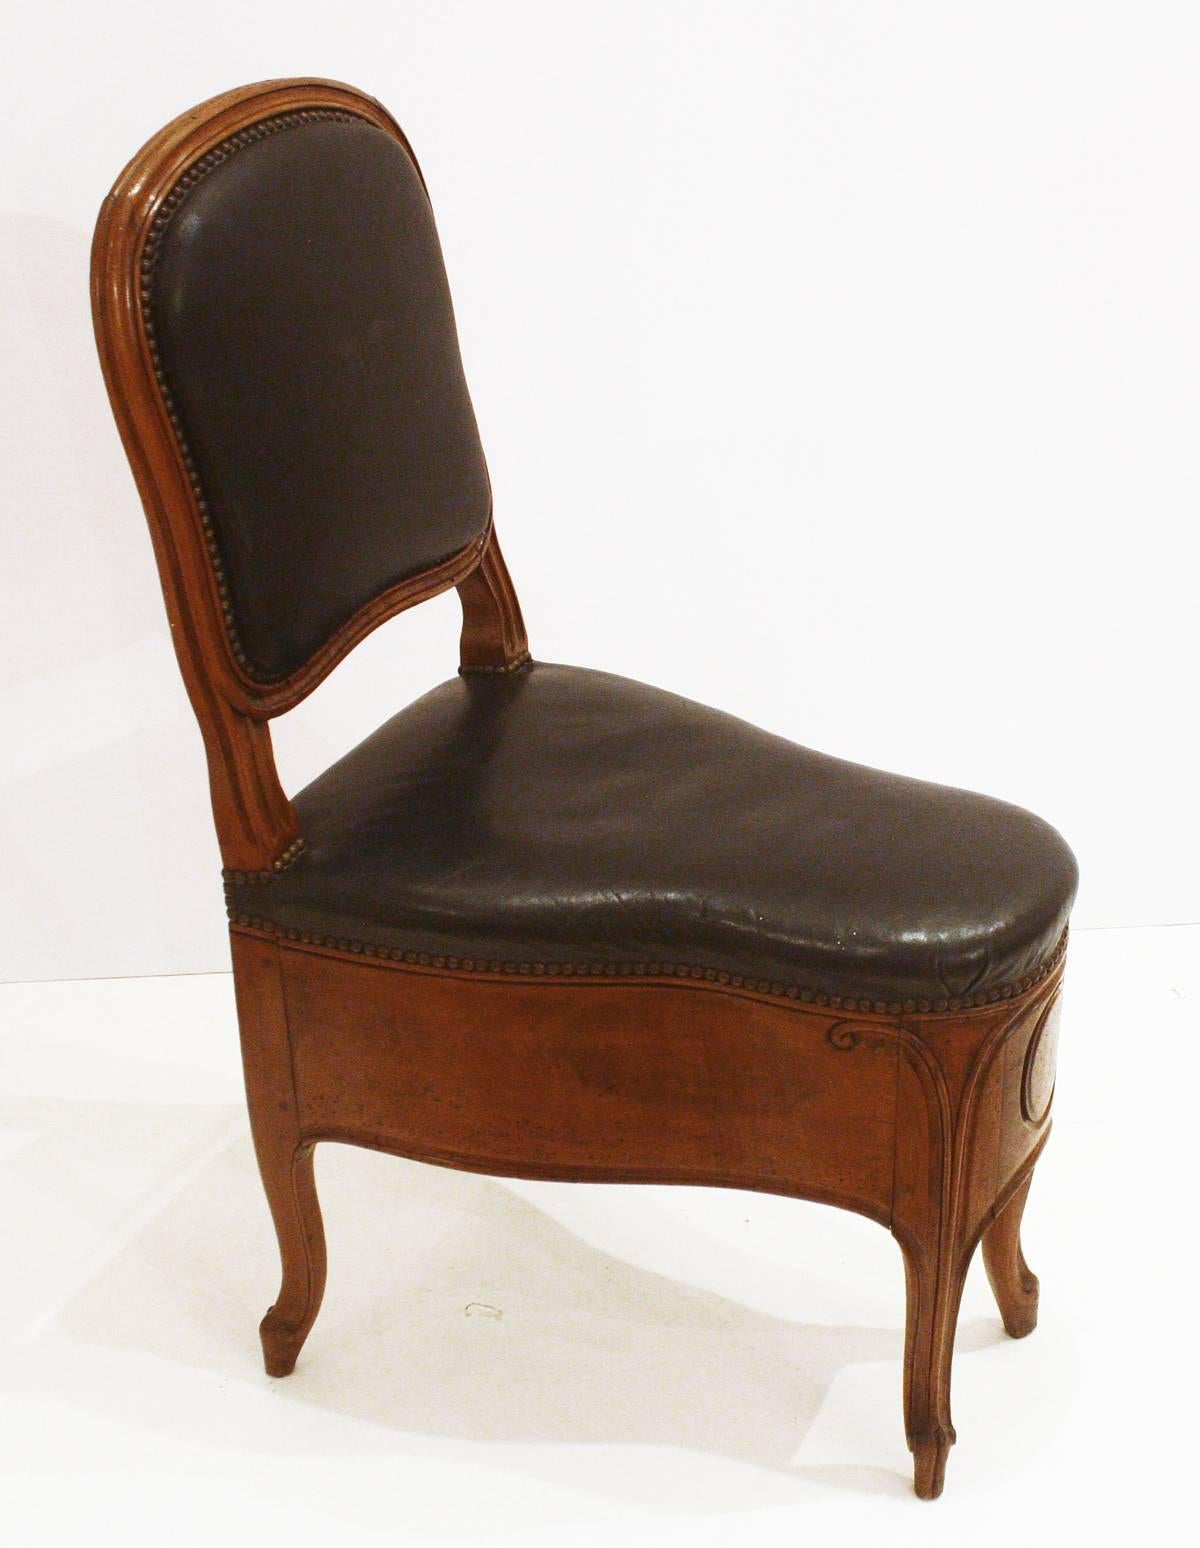 a handsome carved Louis XV French fruit wood bidet / chair, now fixed in a closed position with an upholstered black leather seat and back, nail head trim, signed / stamped by   maker, France, mid-18th century

stamped JME  TILLIARD

Jean-Baptiste I